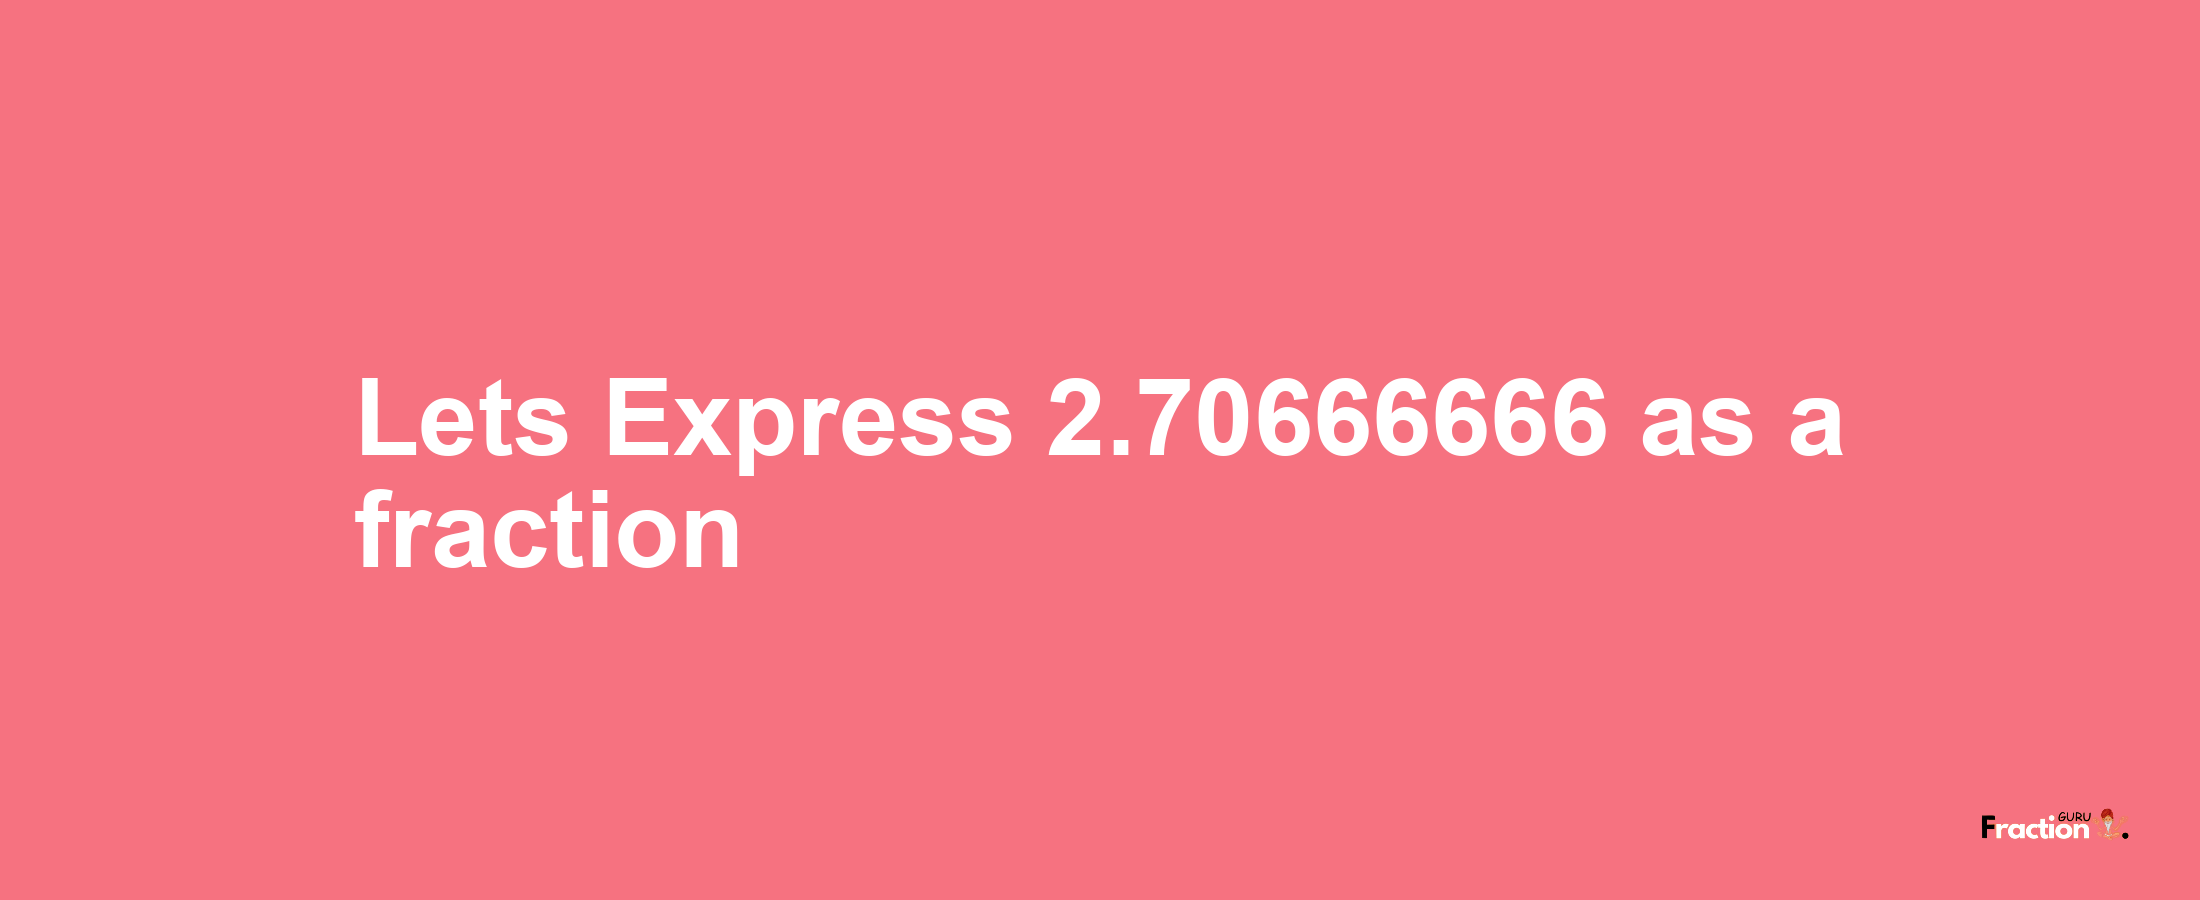 Lets Express 2.70666666 as afraction